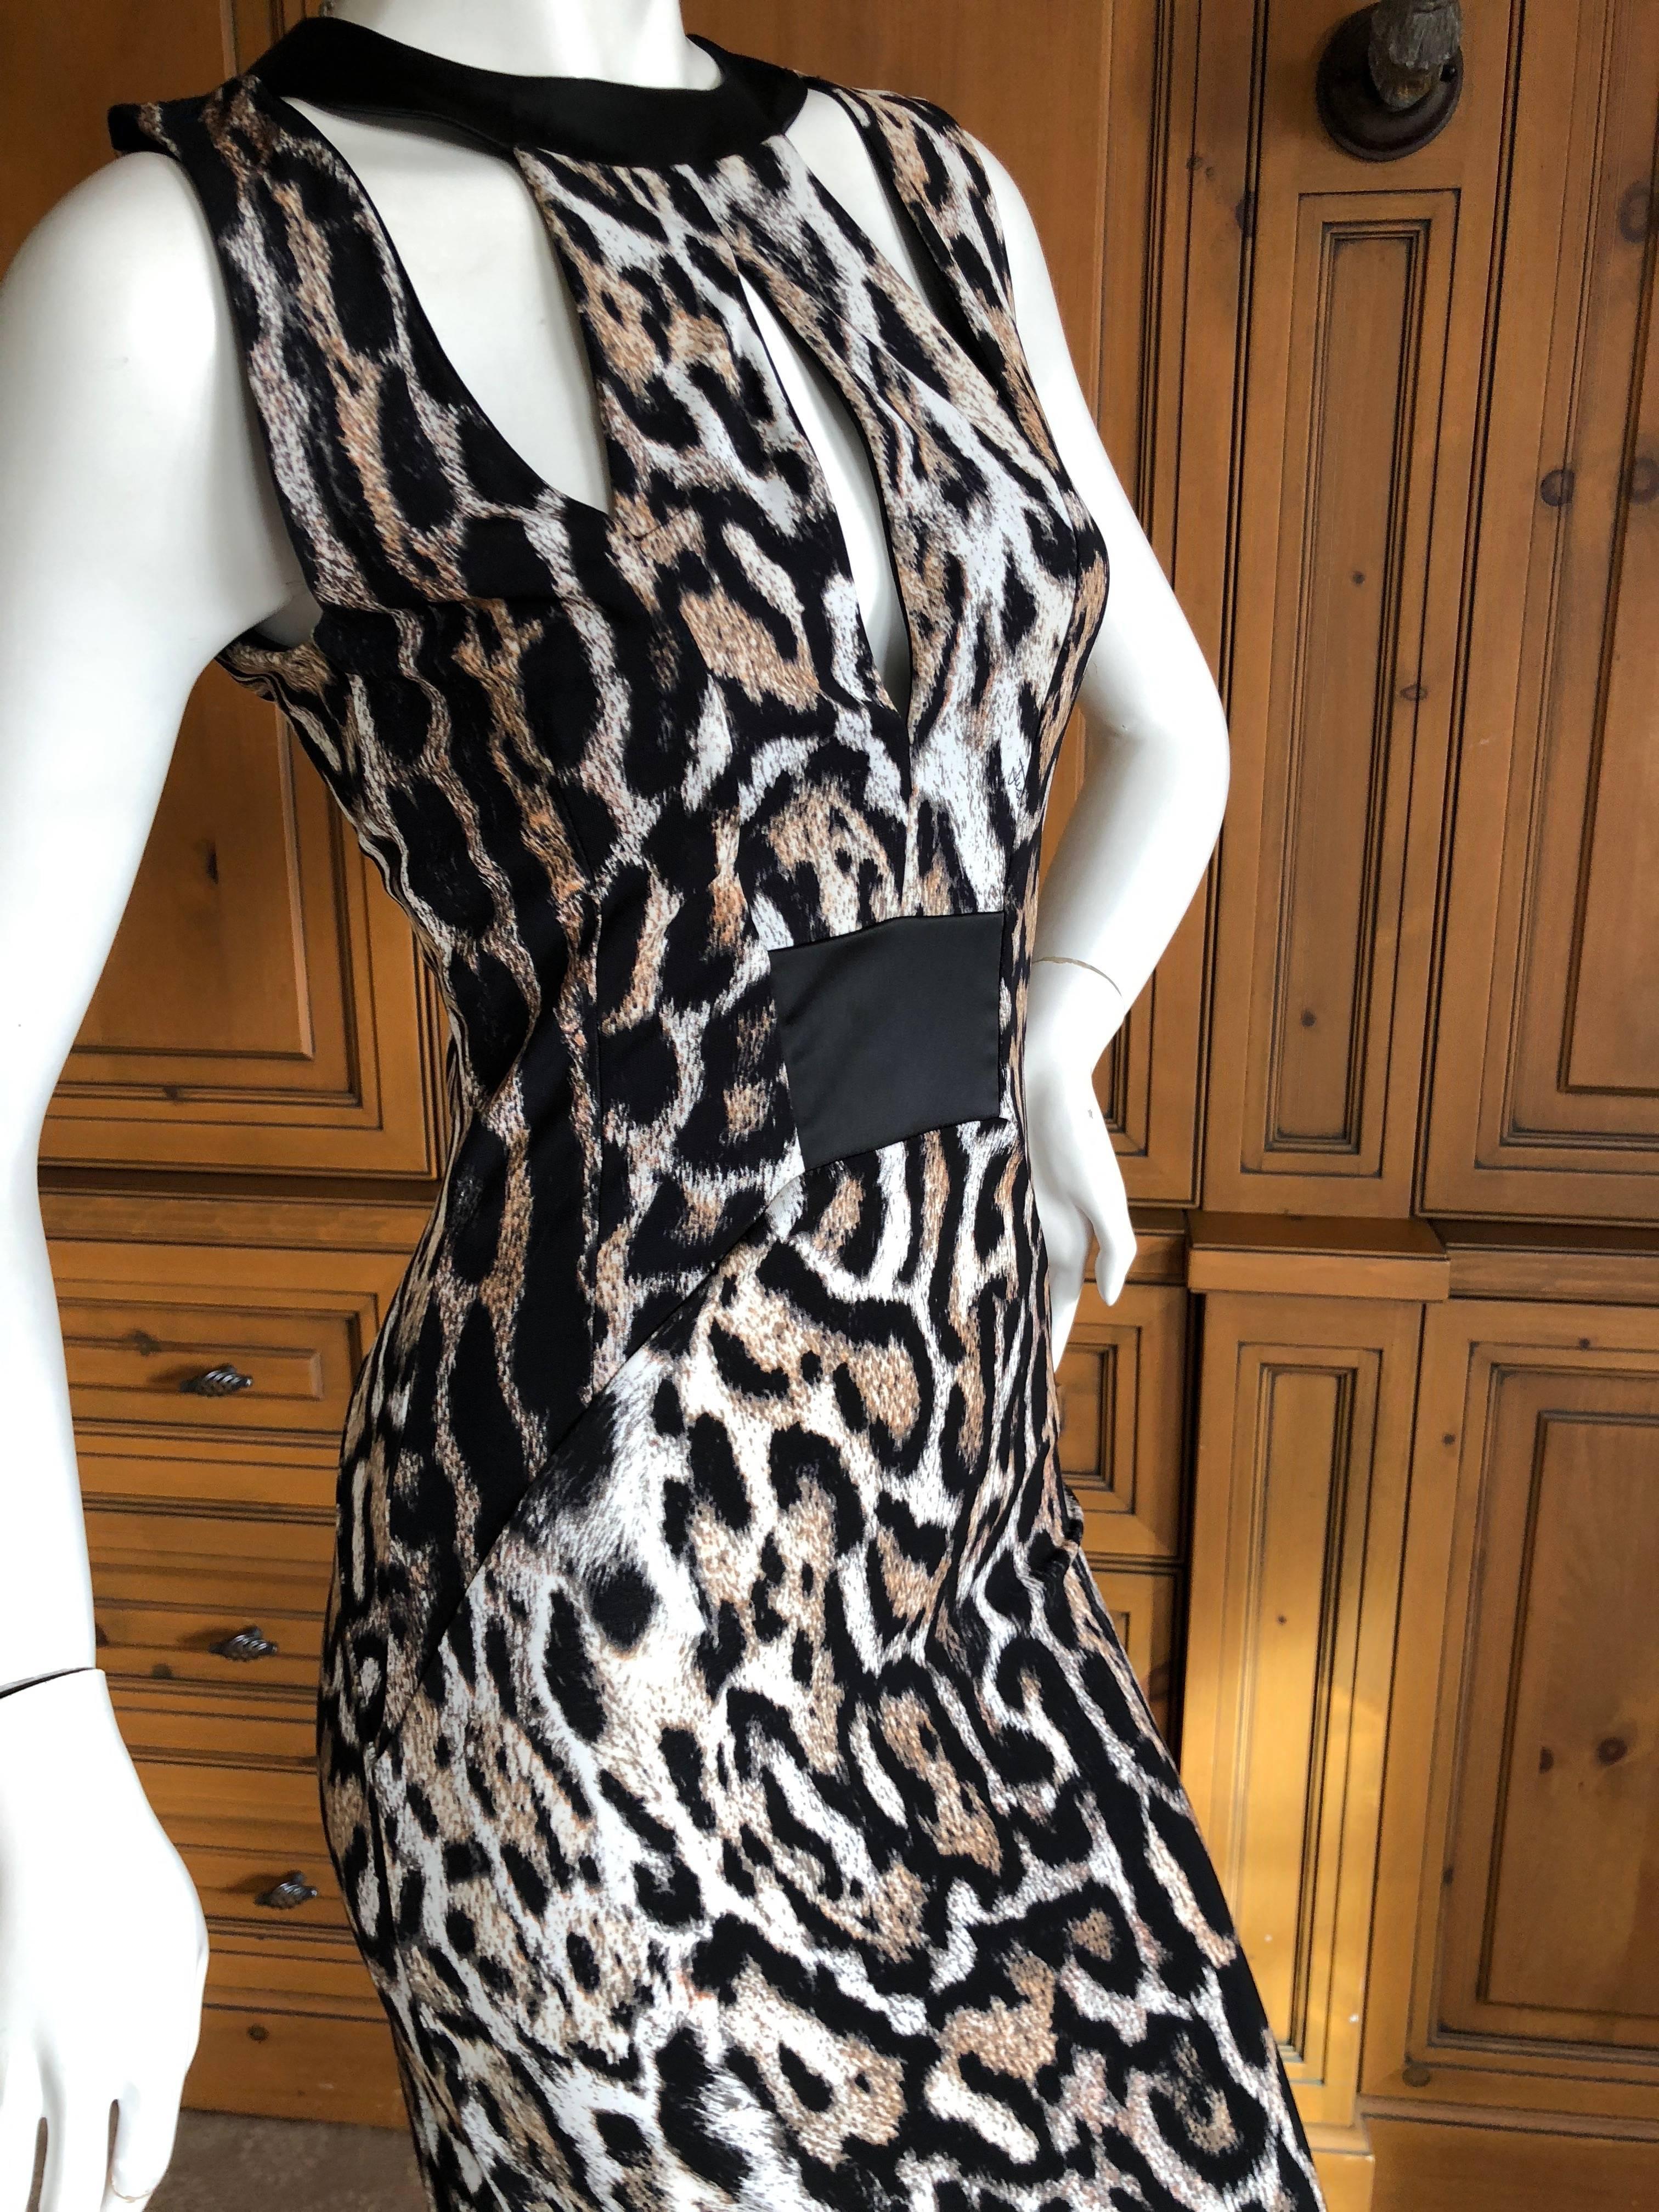 Roberto Cavalli Long Leopard Dress with Cut Outs for Just Cavalli In Excellent Condition For Sale In Cloverdale, CA